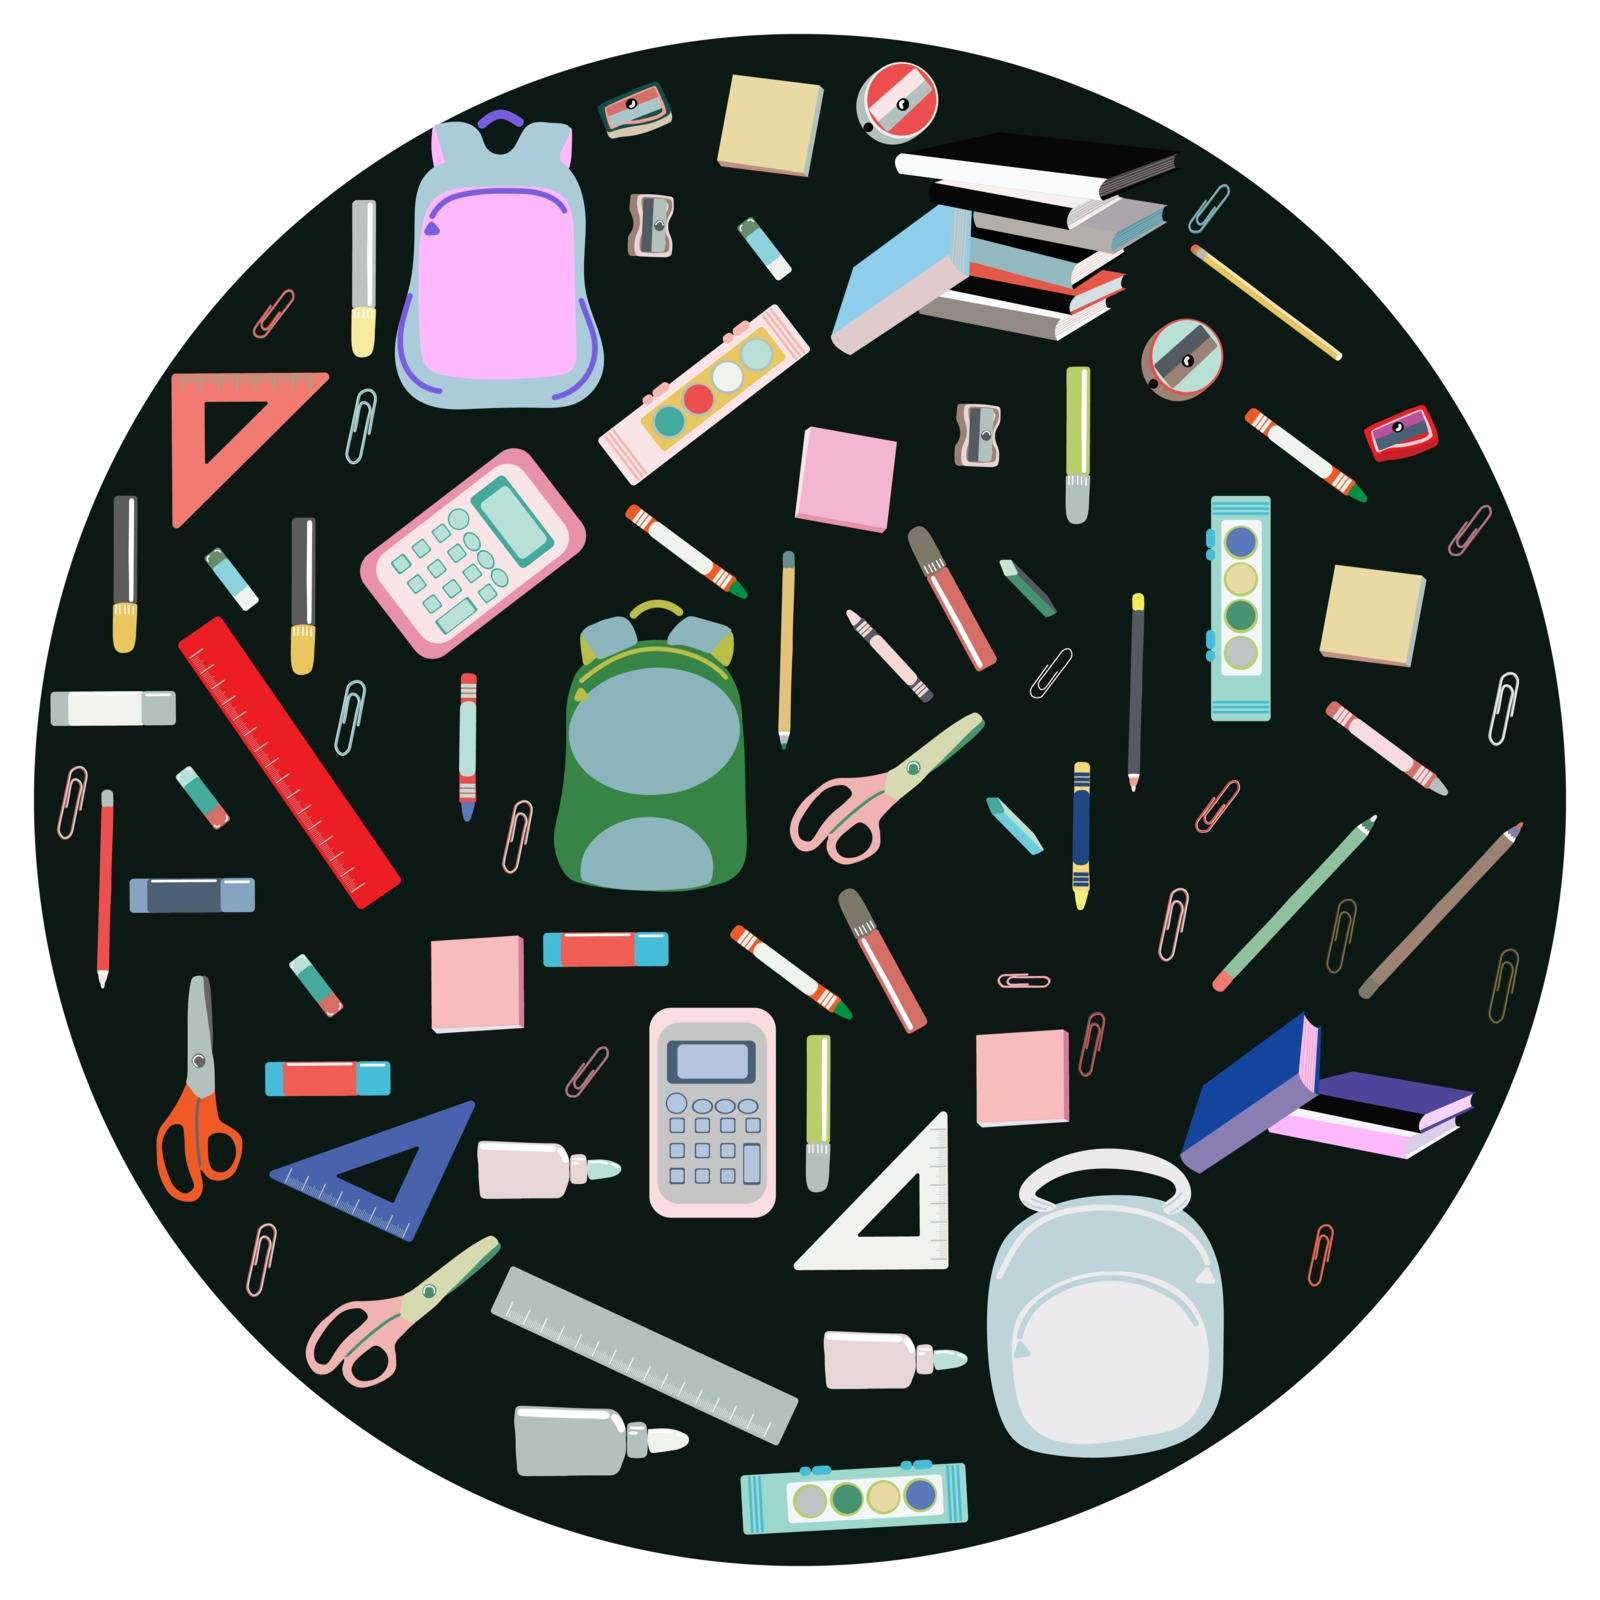 Back to school concept, flat design. Bright colors backpack, paints, crayons, pencils and school supplies in round shape on black circle. 